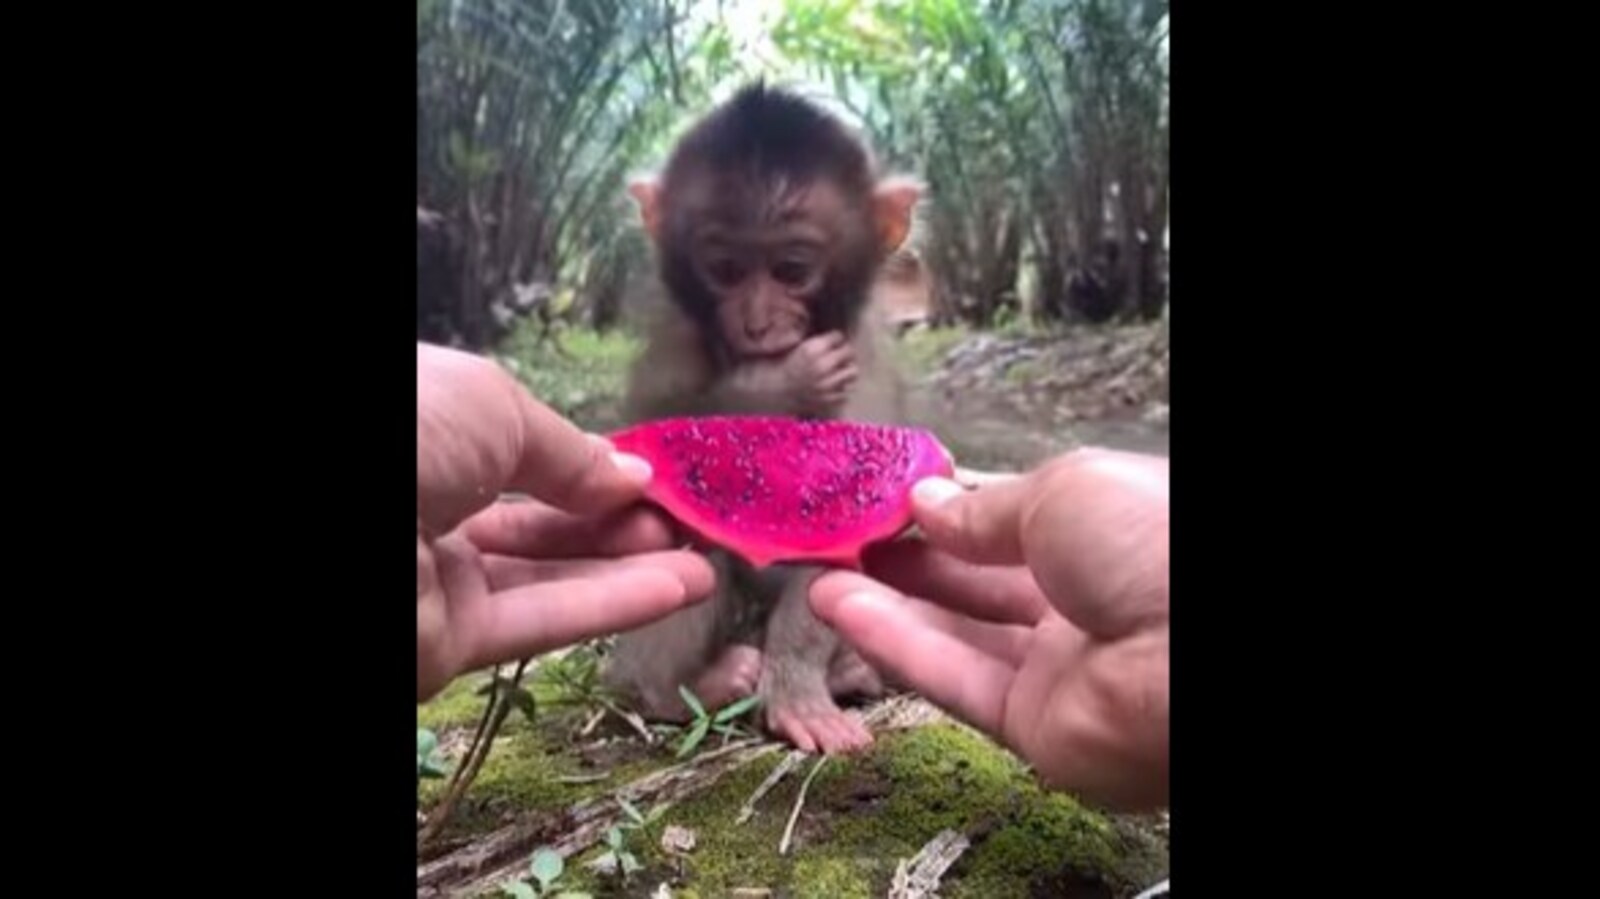 Baby monkey eating some dragon fruit given by human will make your day. Watch